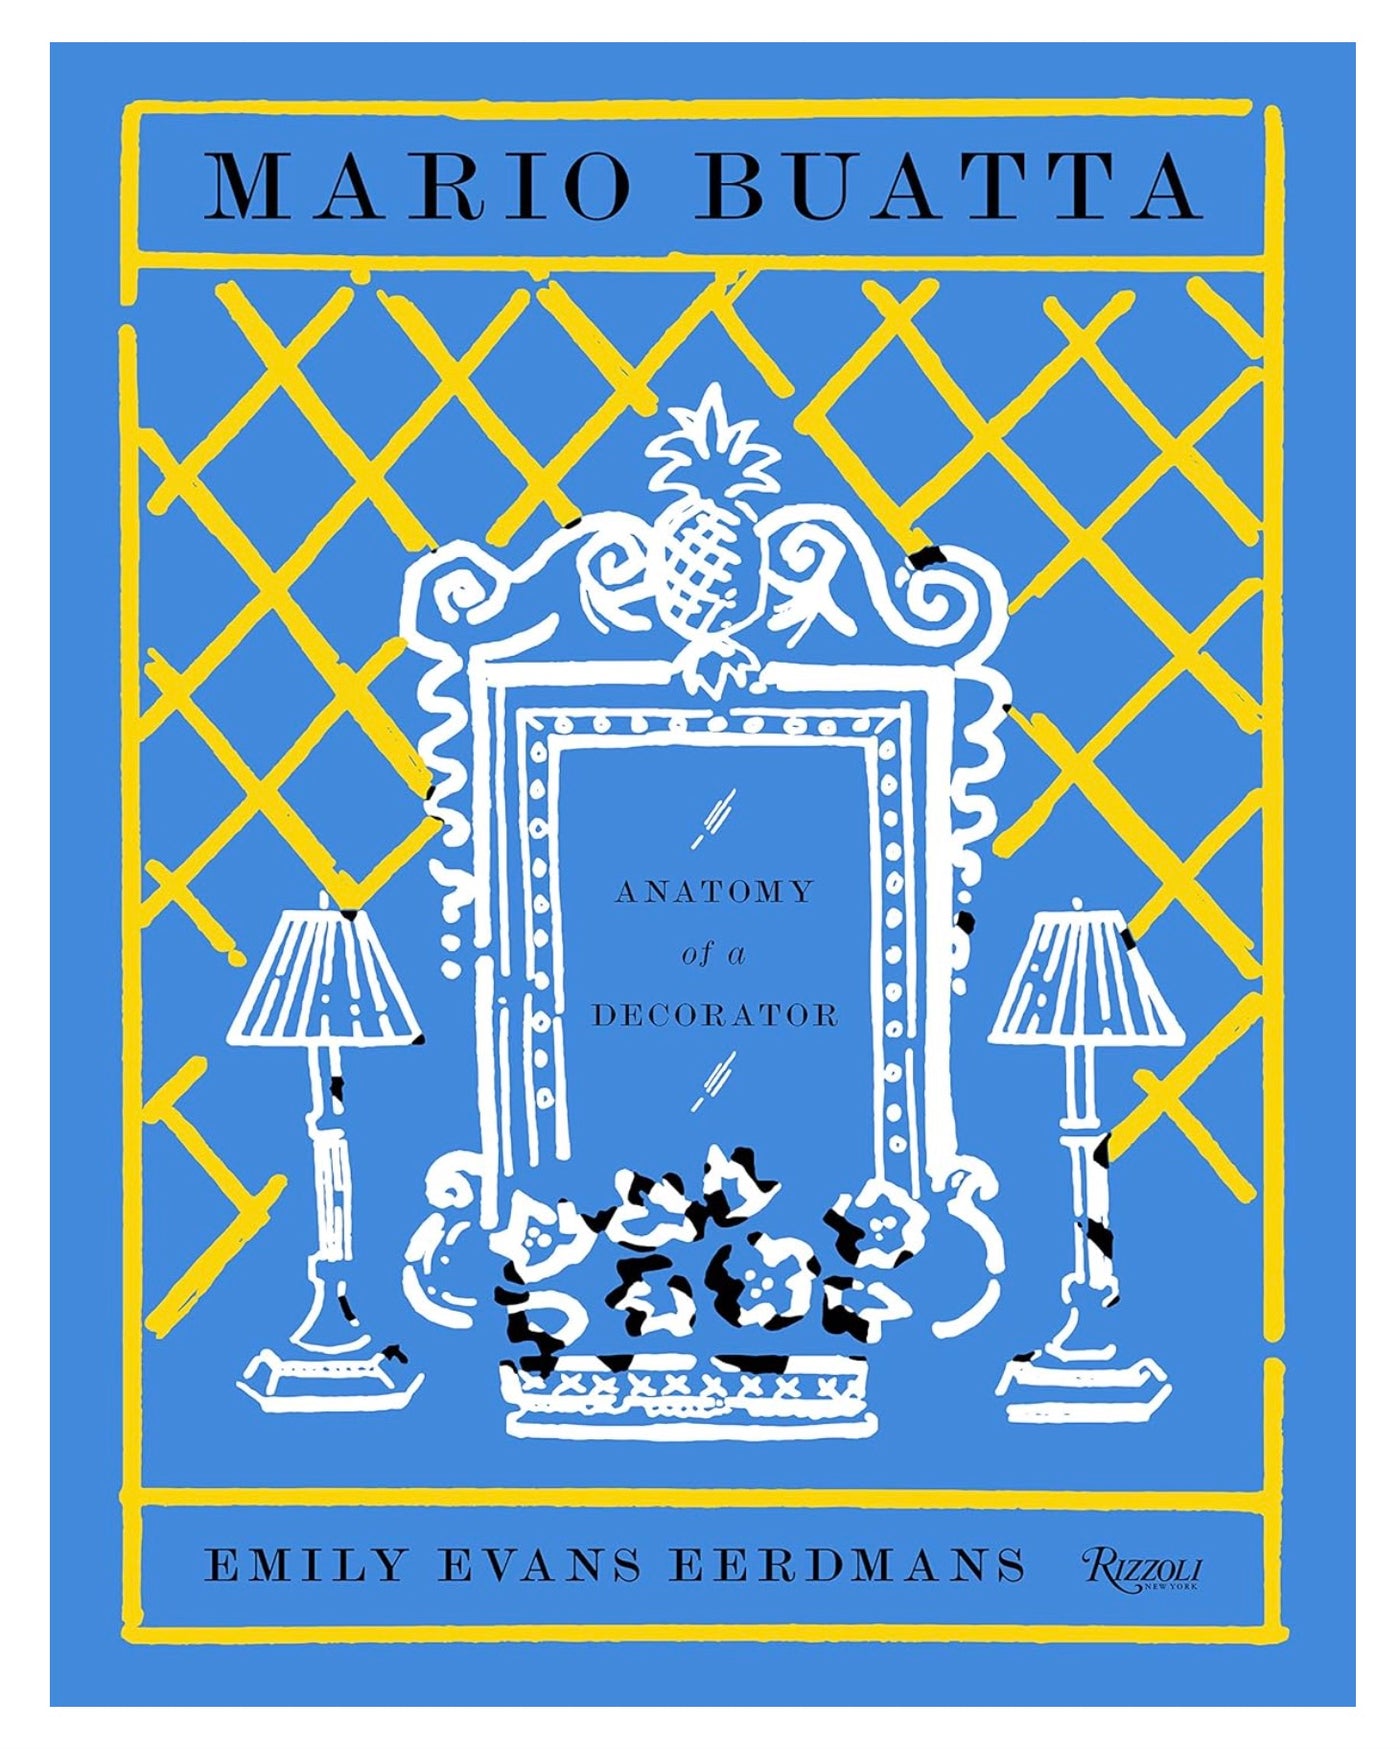 Mario Buatta: Anatomy of a Decorator by Emily Evans Eerdmans | Newport Lamp And Shade | Located in Newport, RI